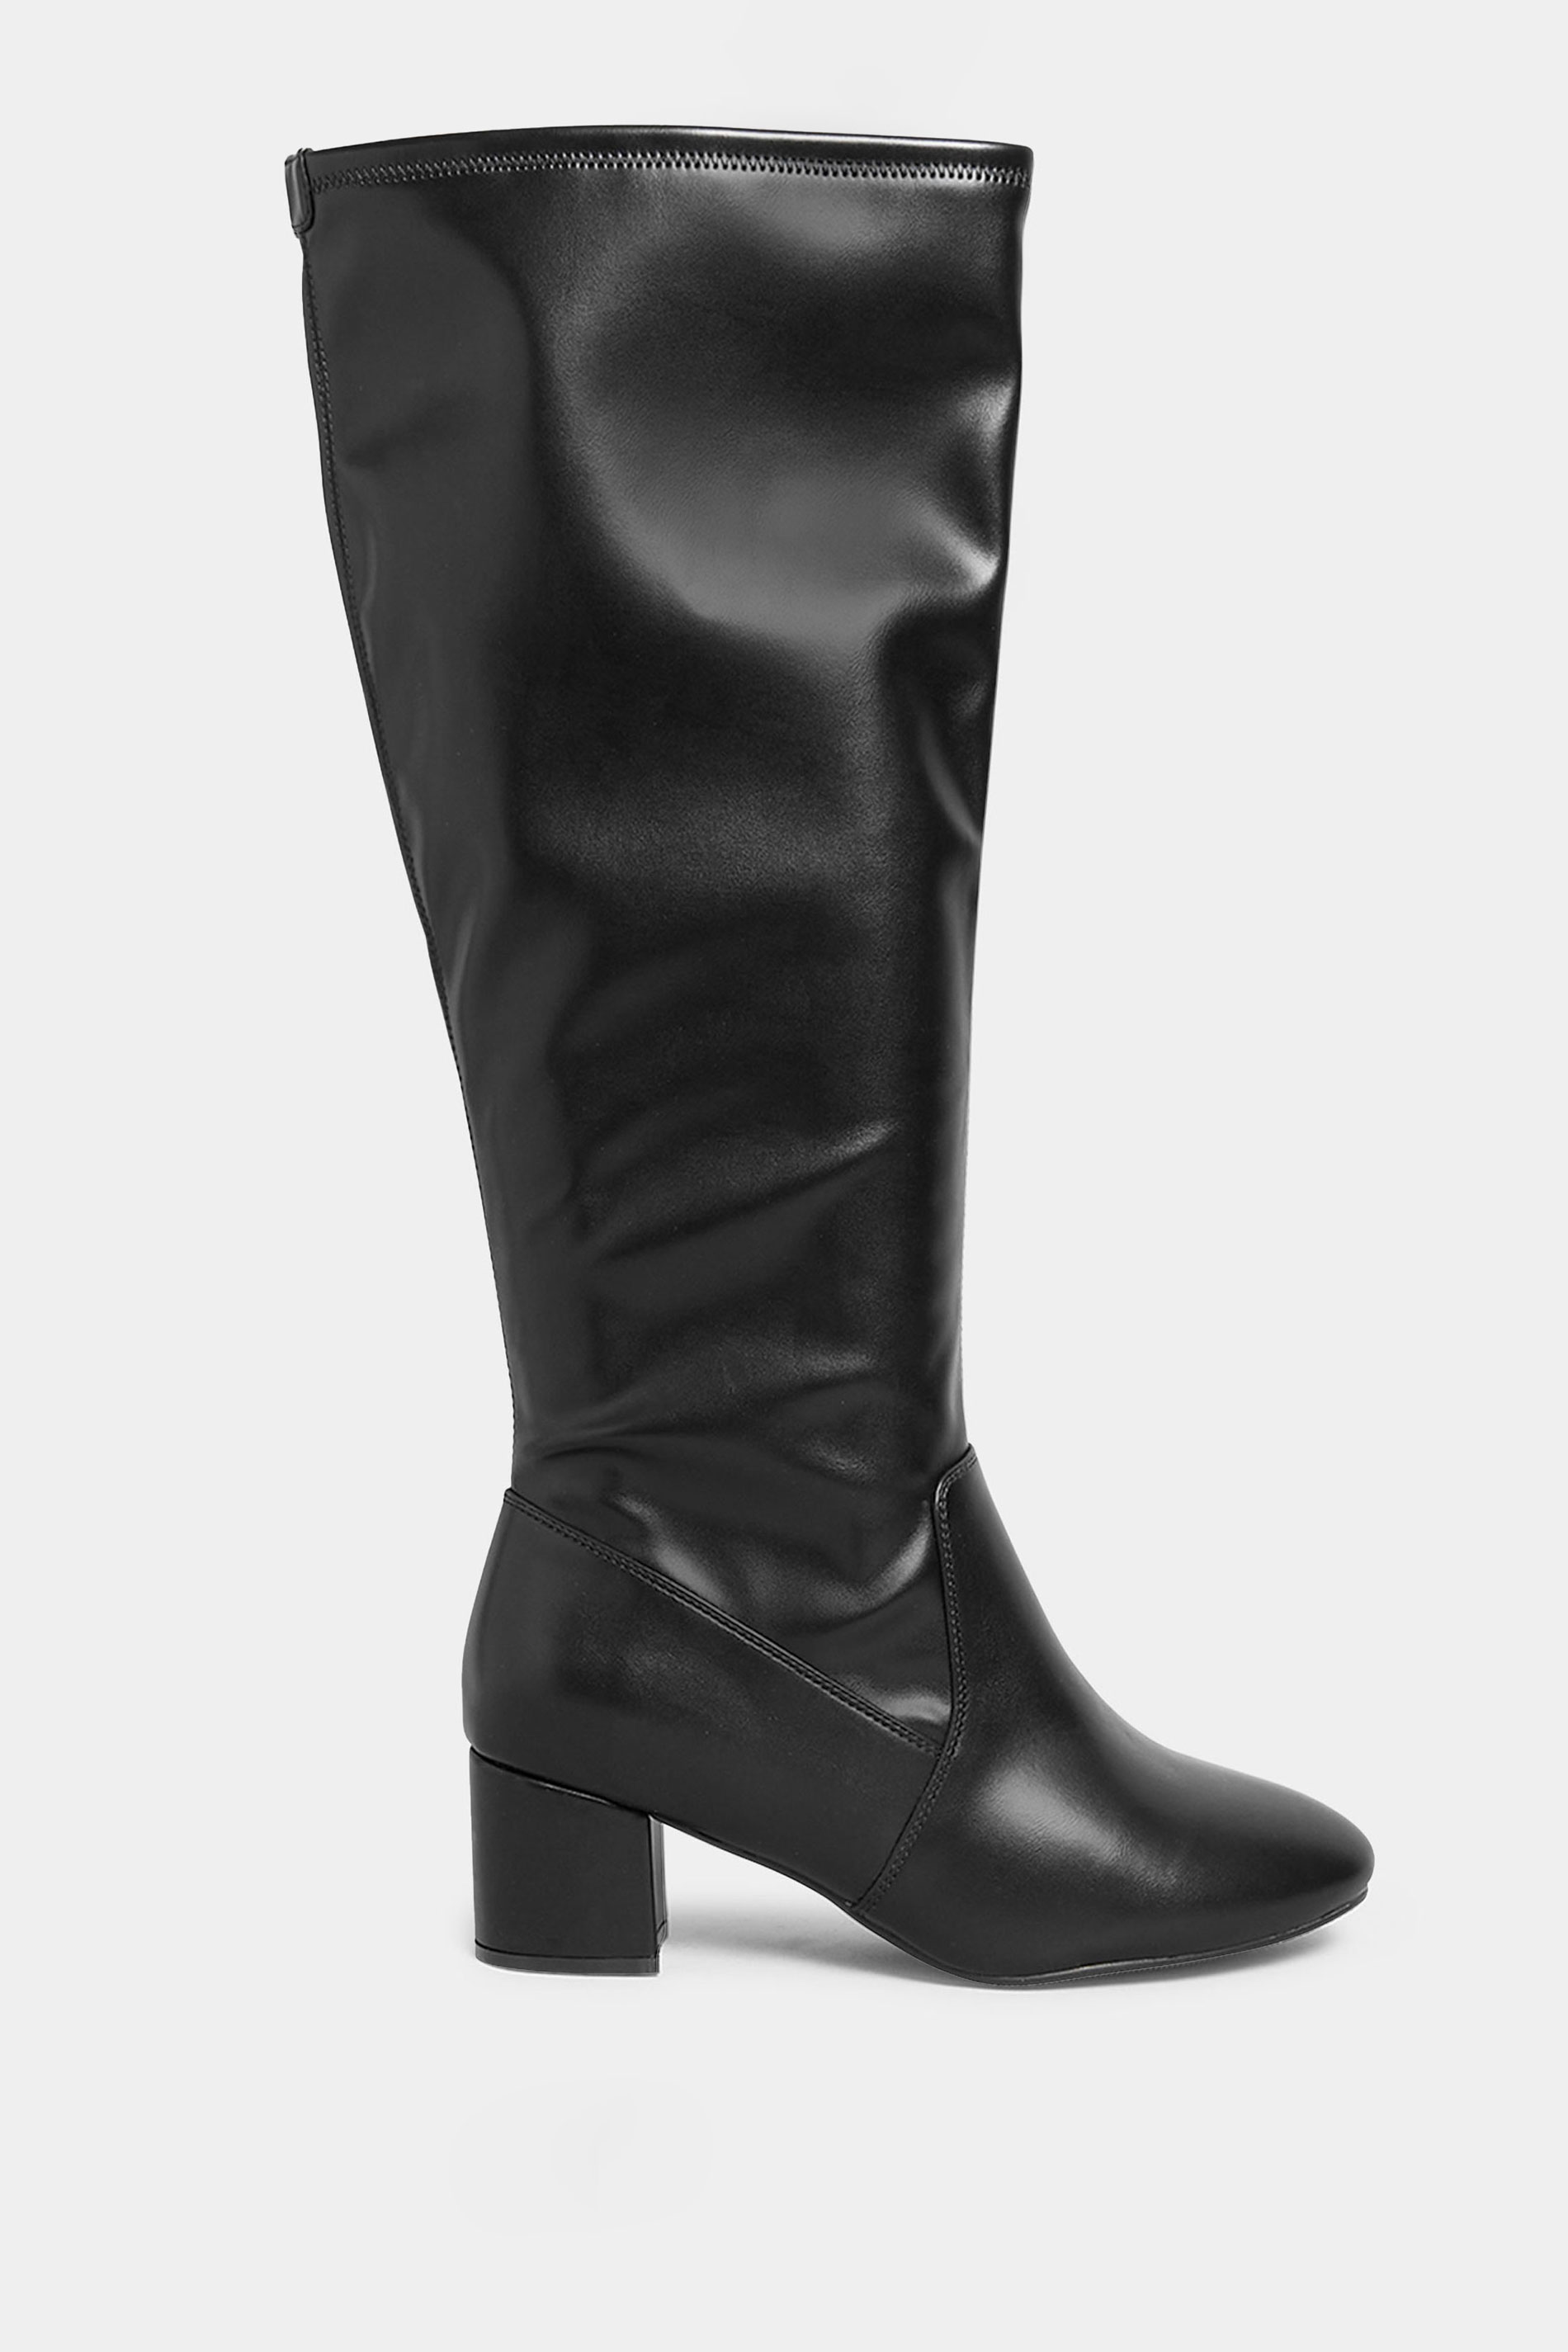 LIMITED COLLECTION Black Stretch Heeled Knee High Boots In Wide & Extra Wide Fit | Yours Clothing 3